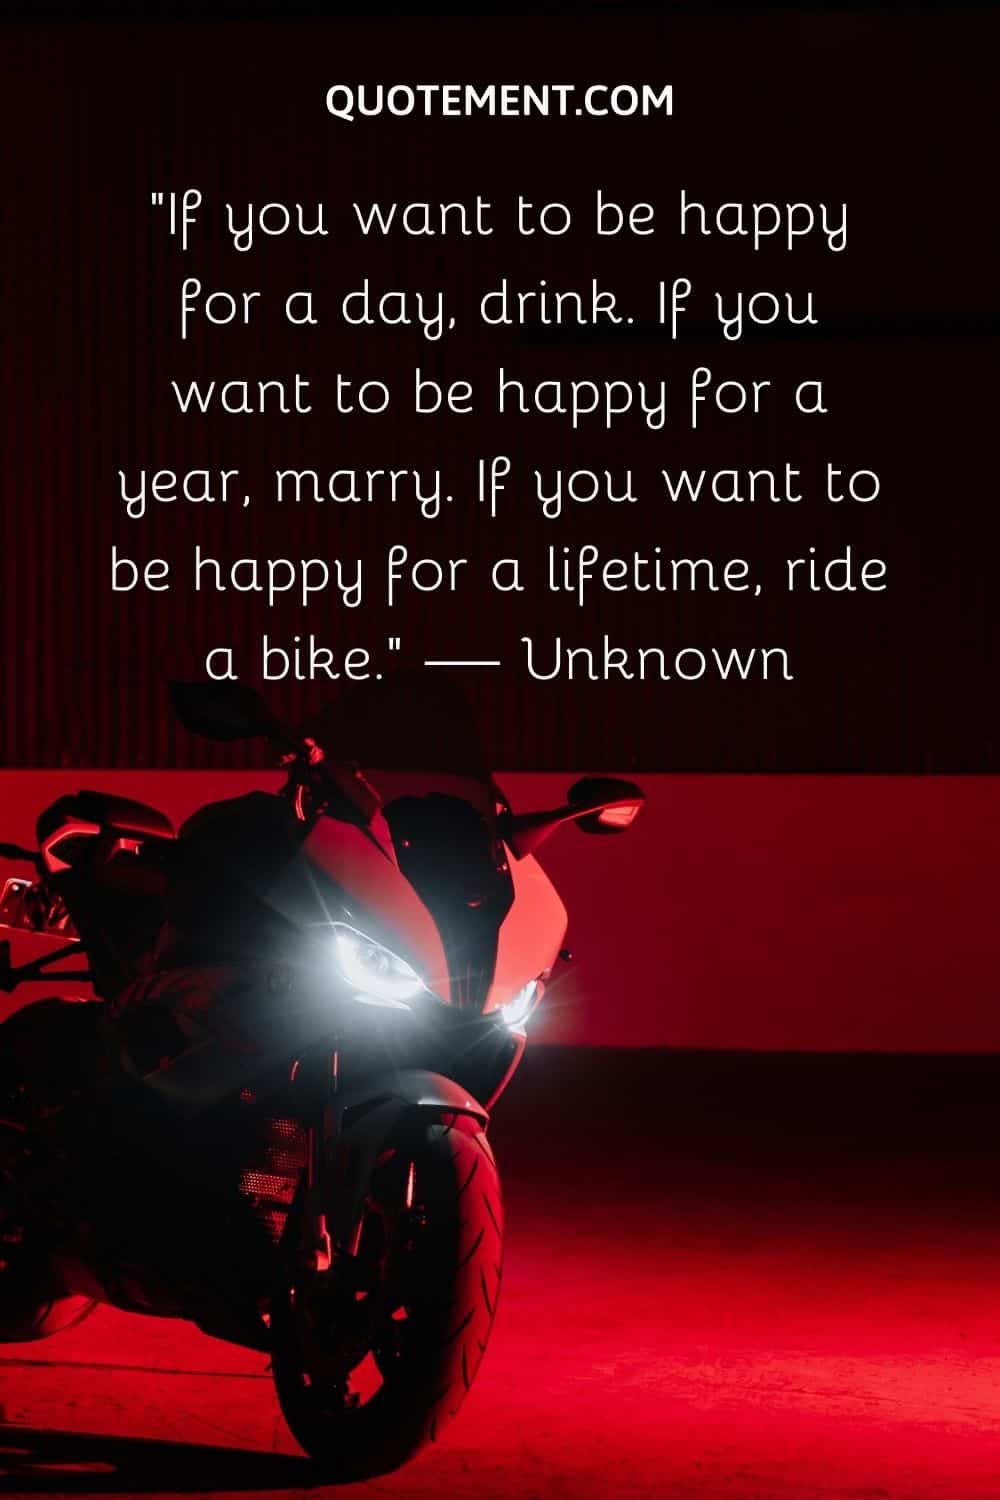 If you want to be happy for a lifetime, ride a bike.